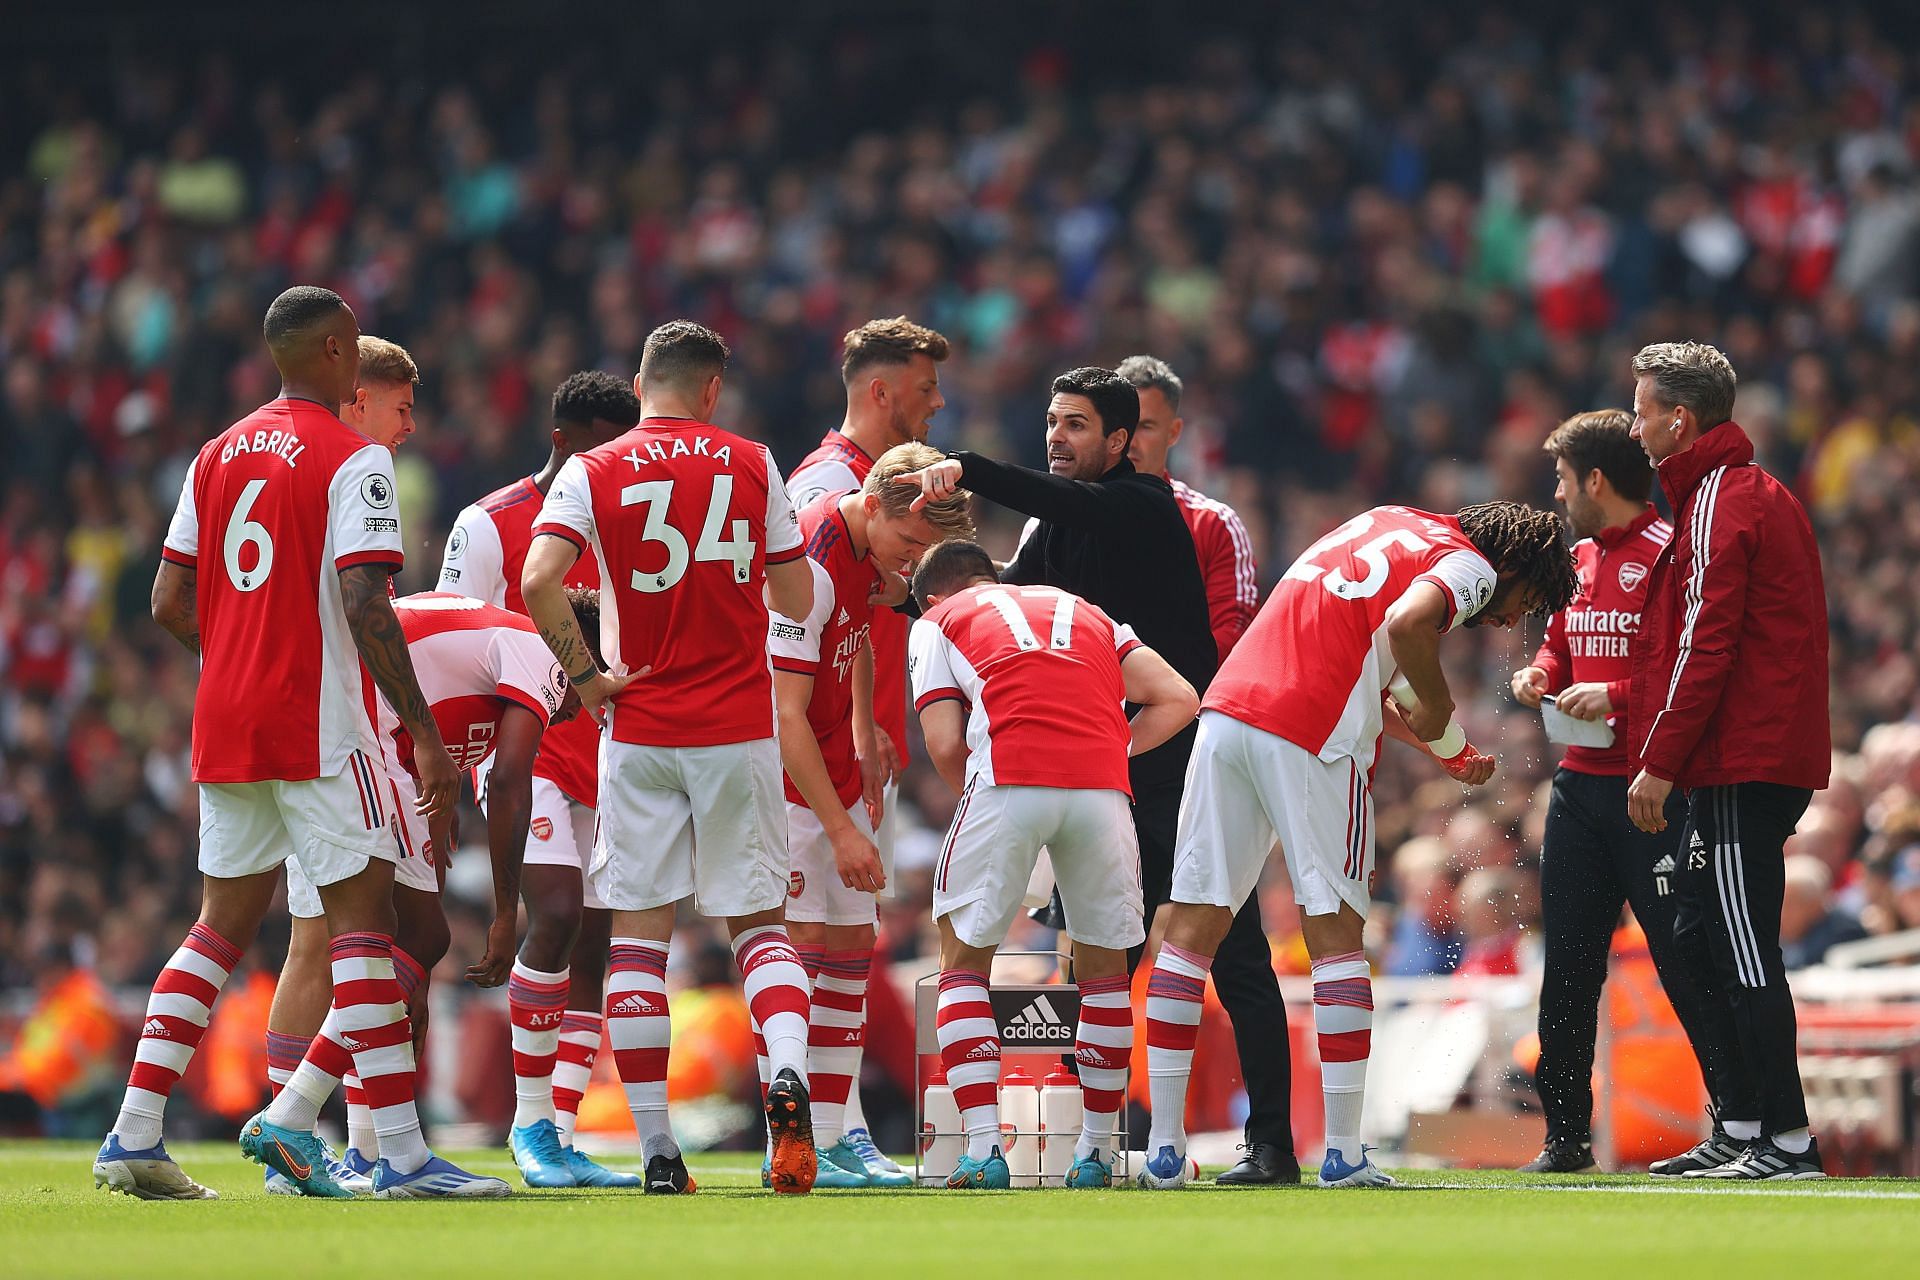 The Gunners have now lost their last two games in the Premier League